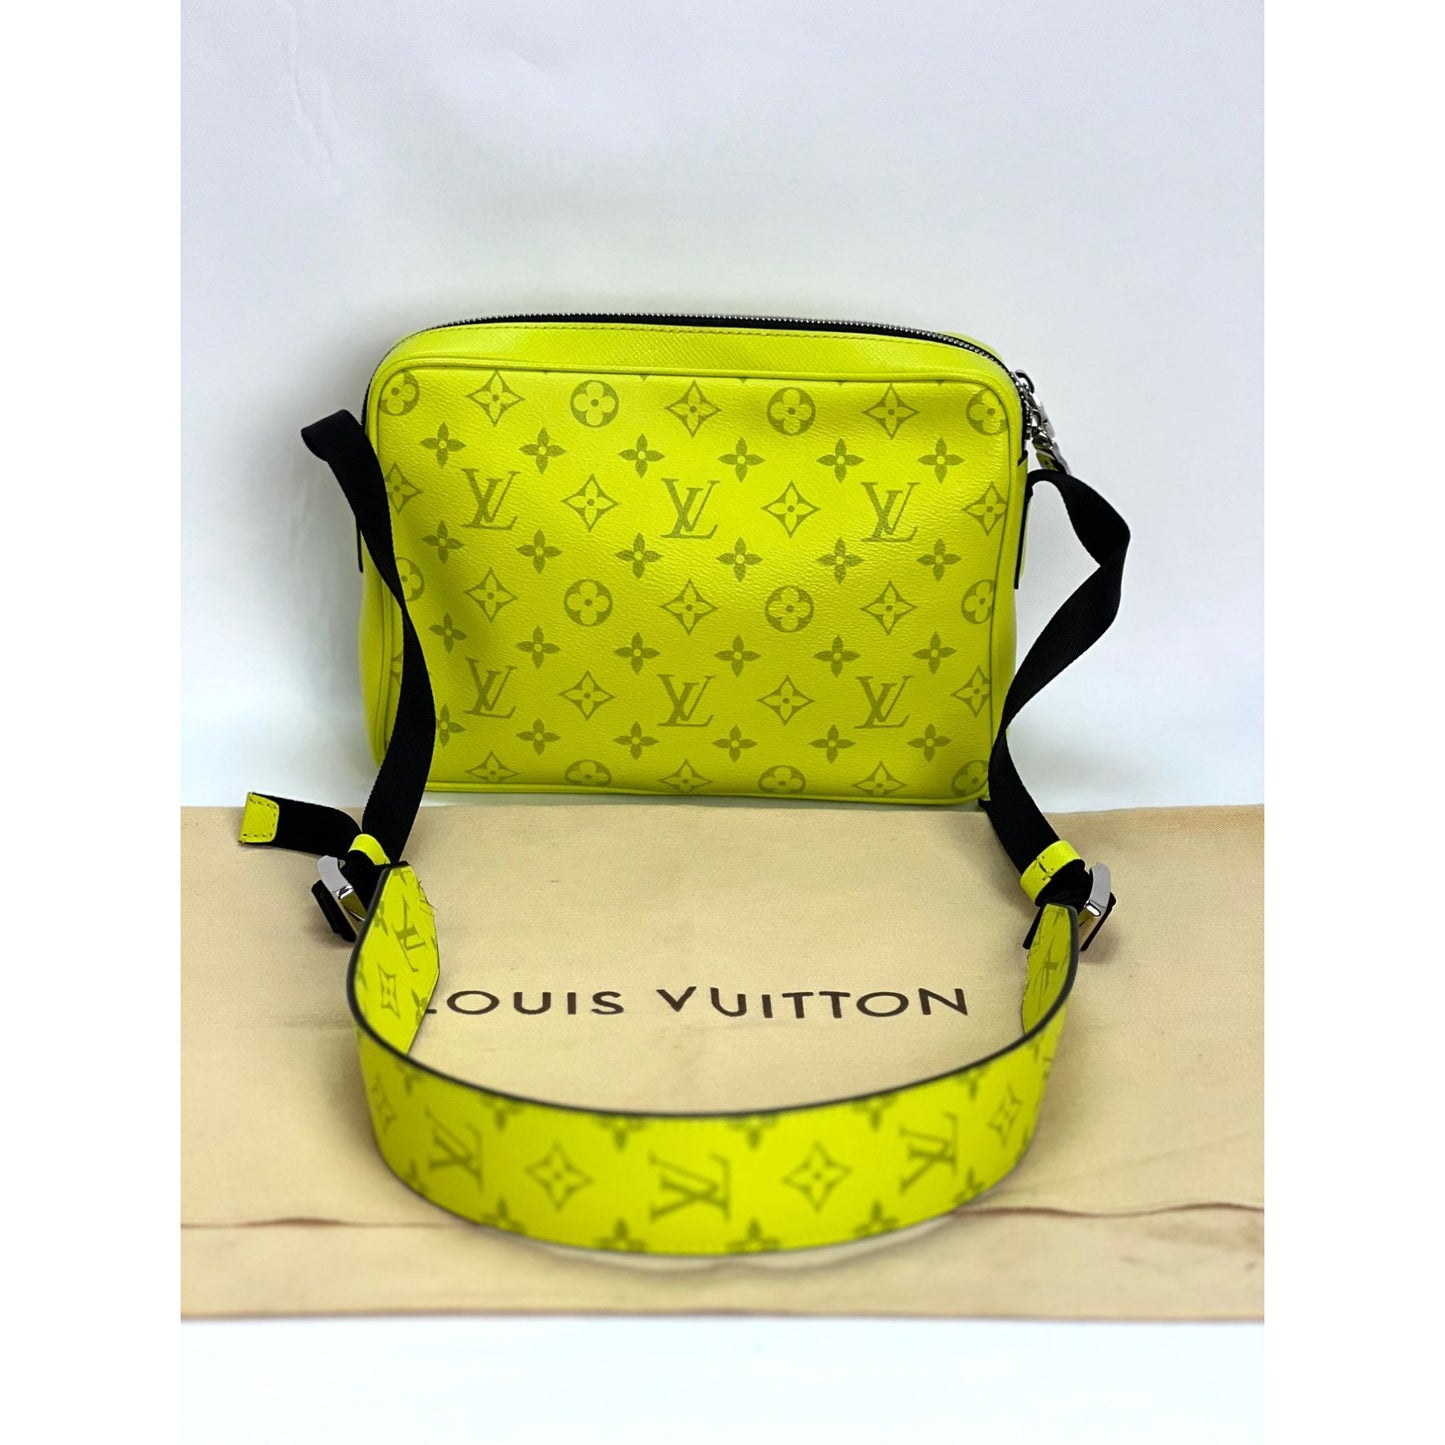 Shop authentic Louis Vuitton Taigarama Outdoor Messenger at